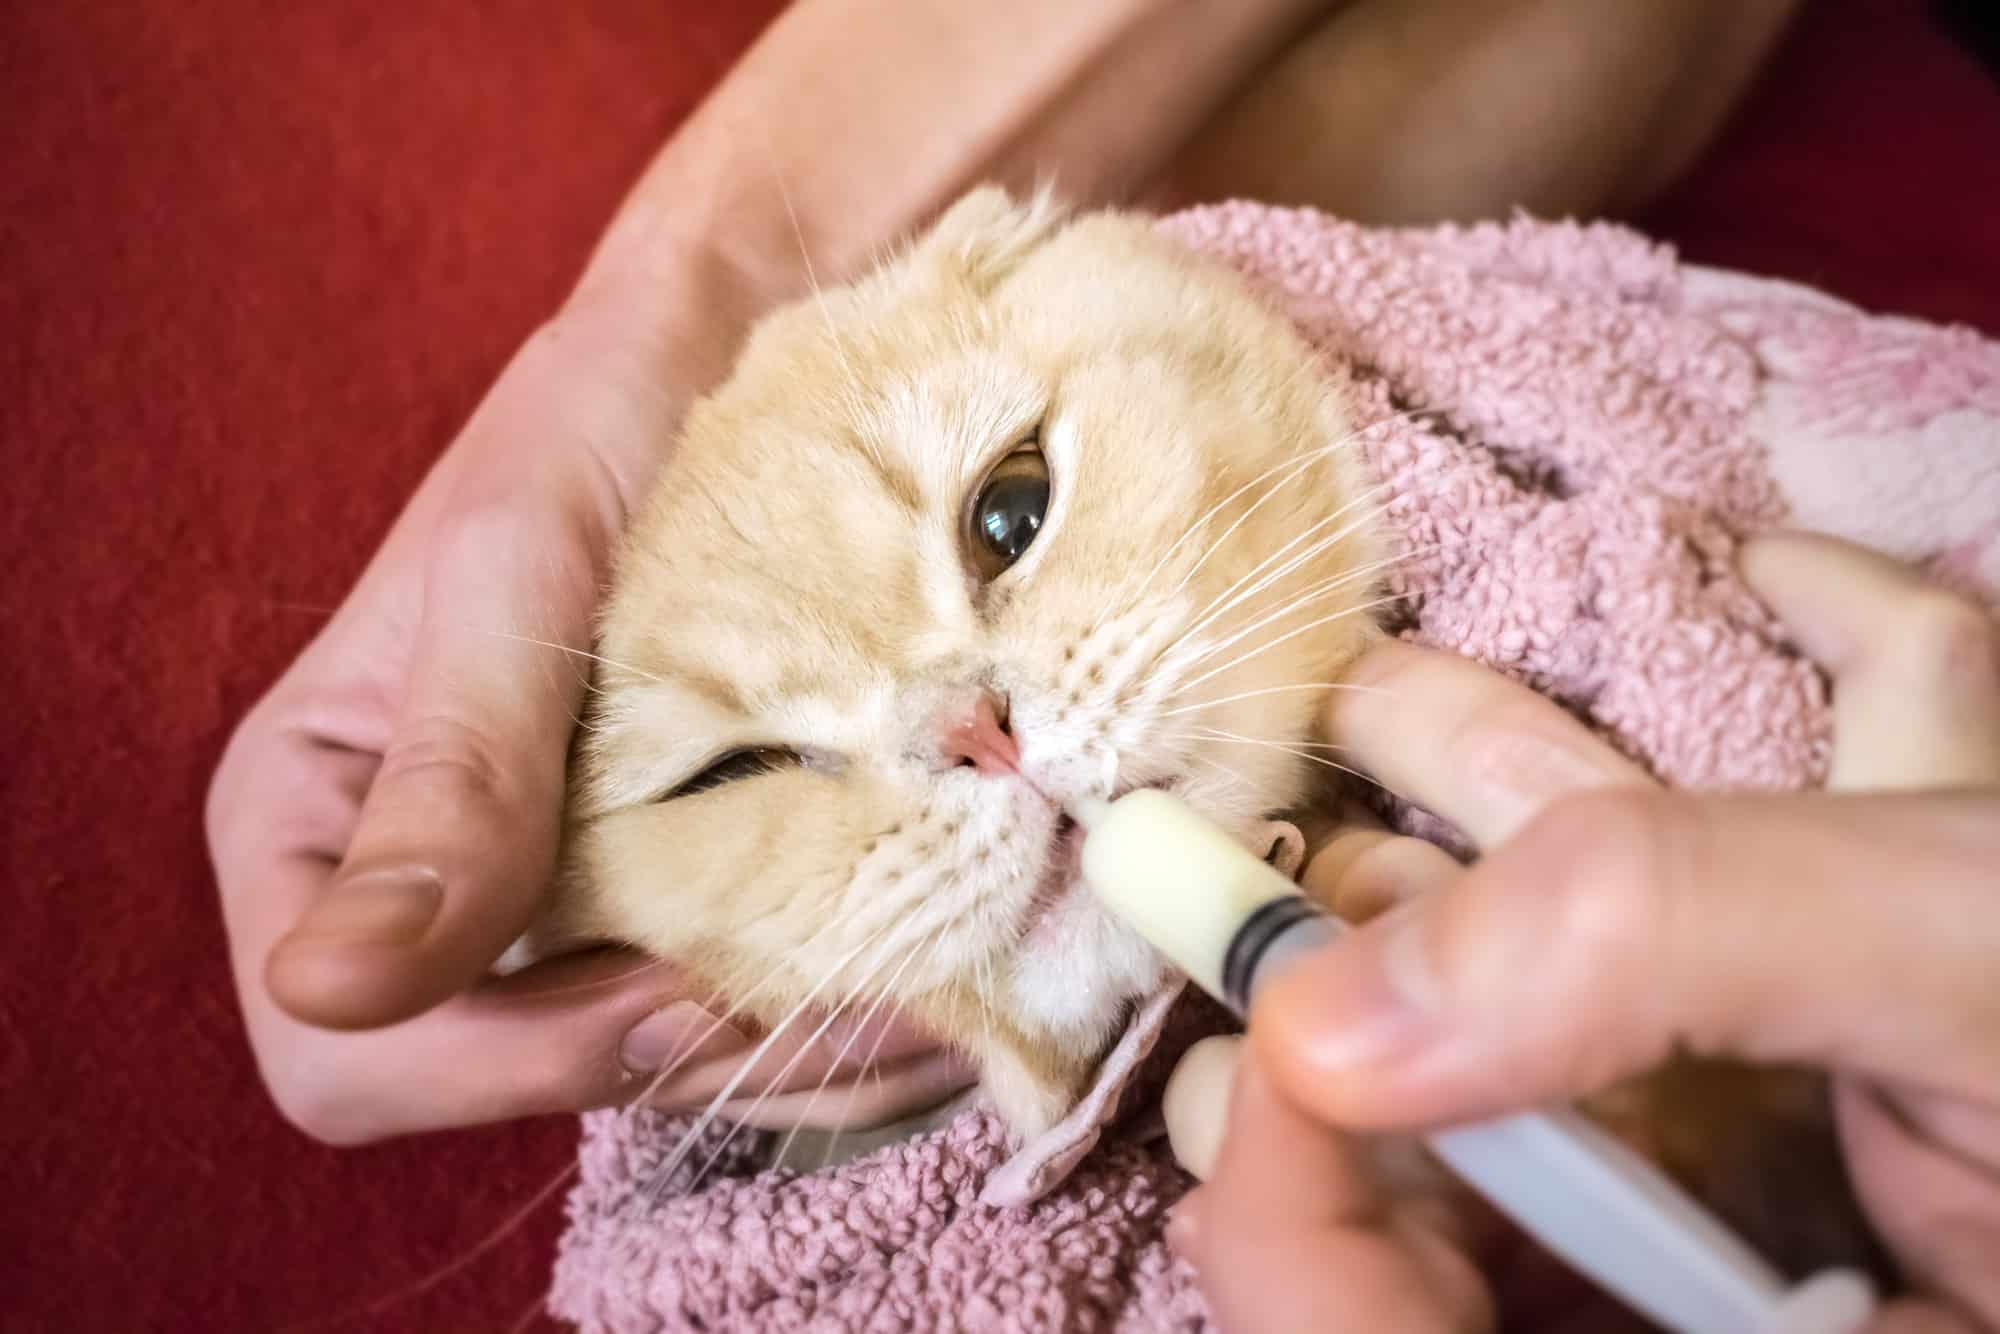 How To Give Cats Liquid Medicine [Most Effective Ways] cats